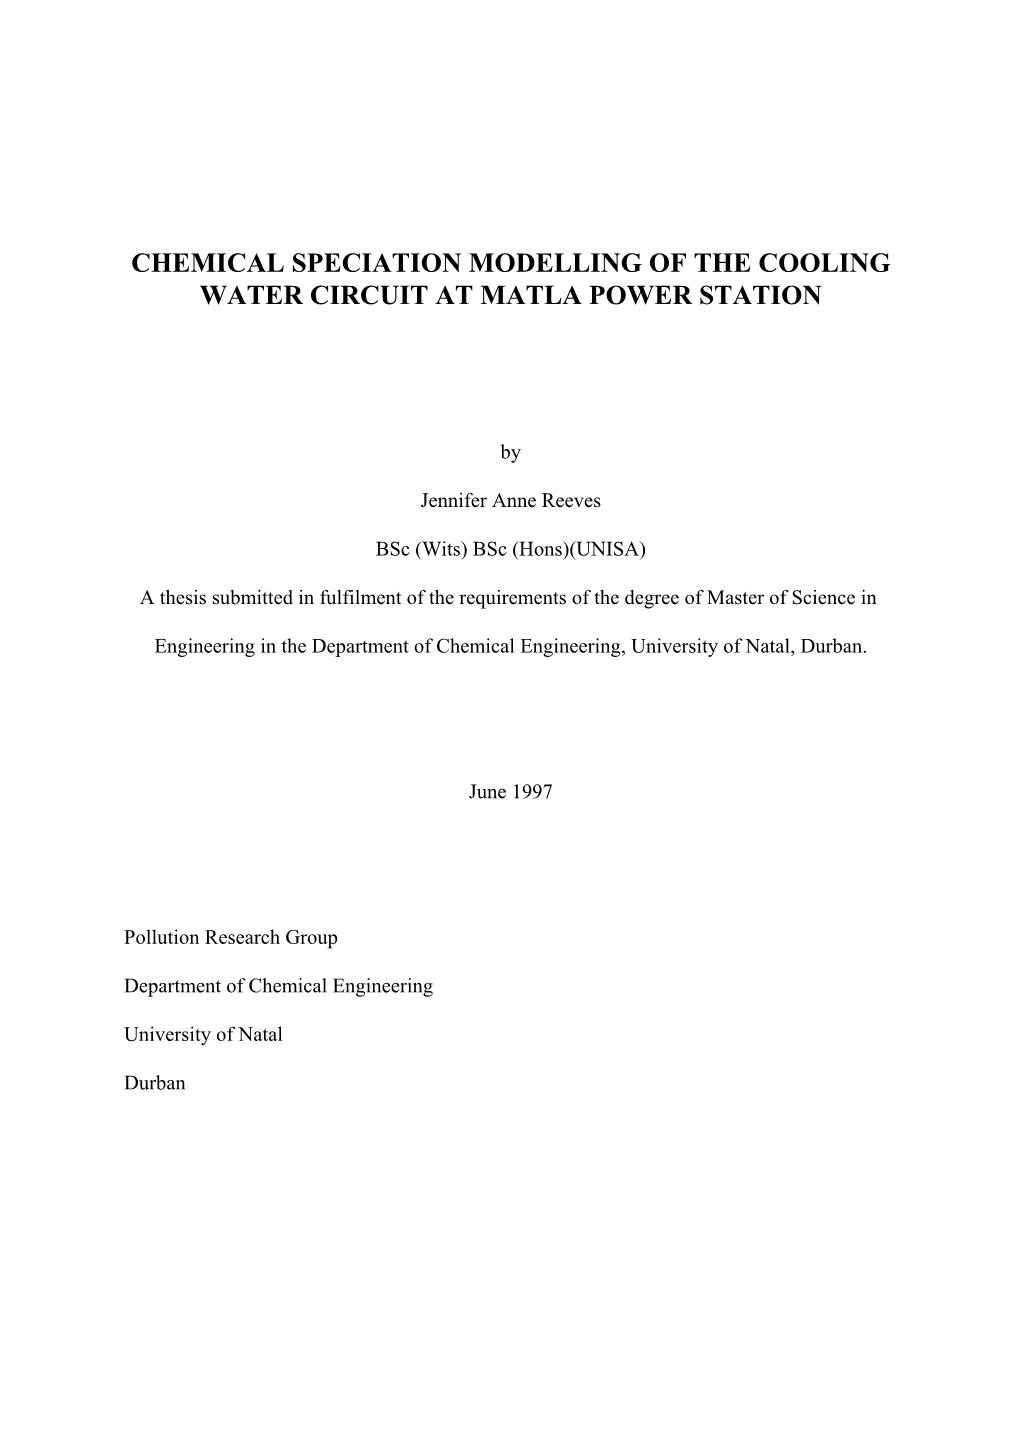 Chemical Speciation Modelling of the Cooling Water Circuit at Matla Power Station